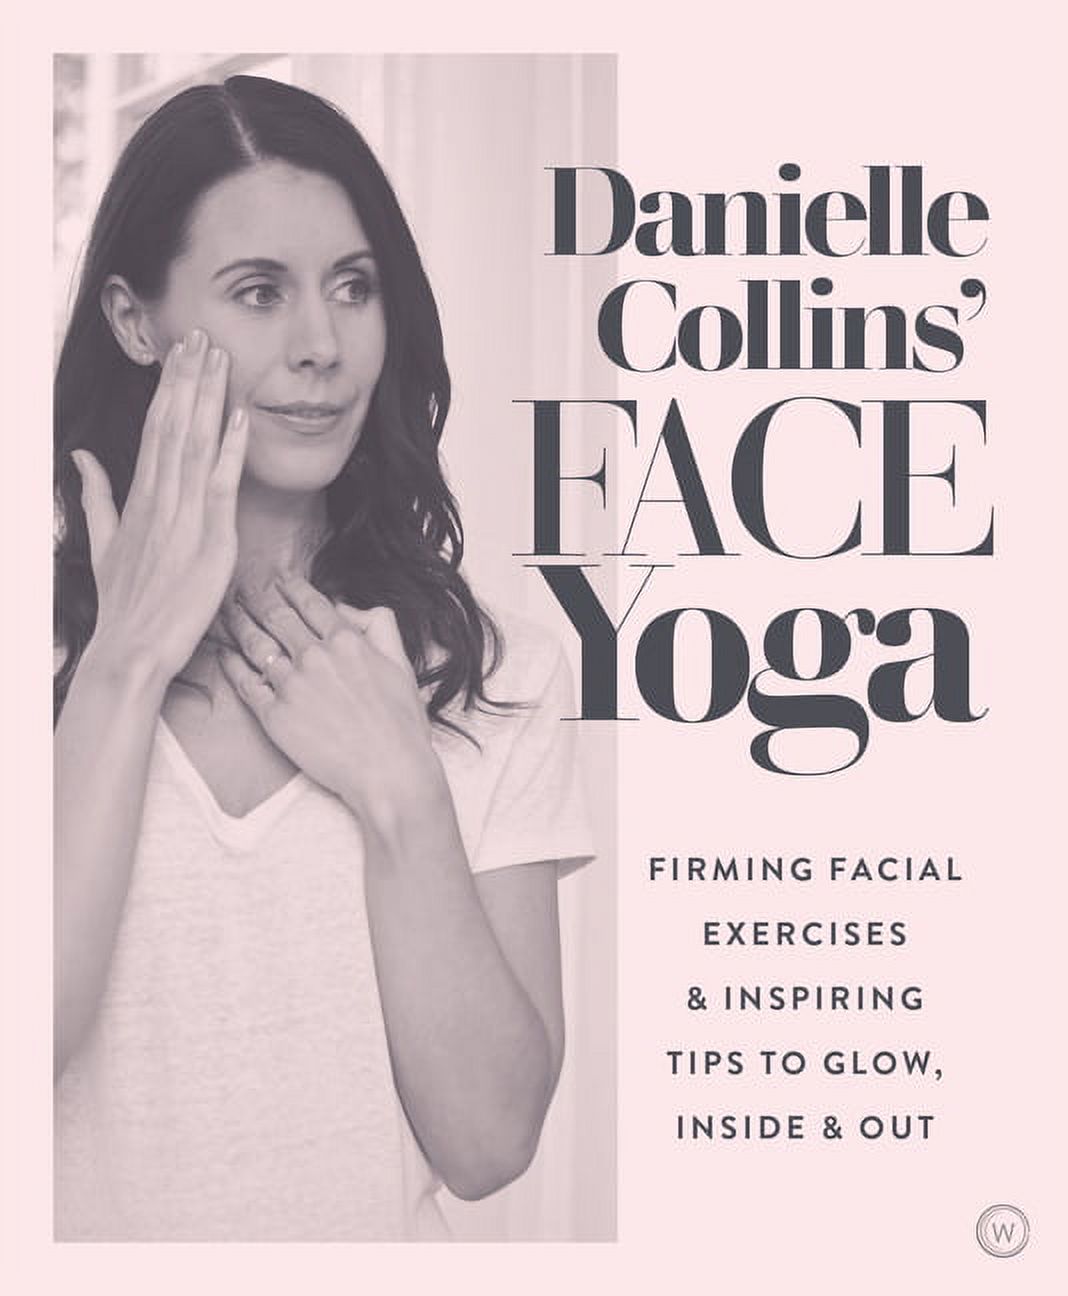 Danielle Collins' Face Yoga : Firming facial exercises & inspiring tips to glow, inside and out (Paperback) - image 1 of 1